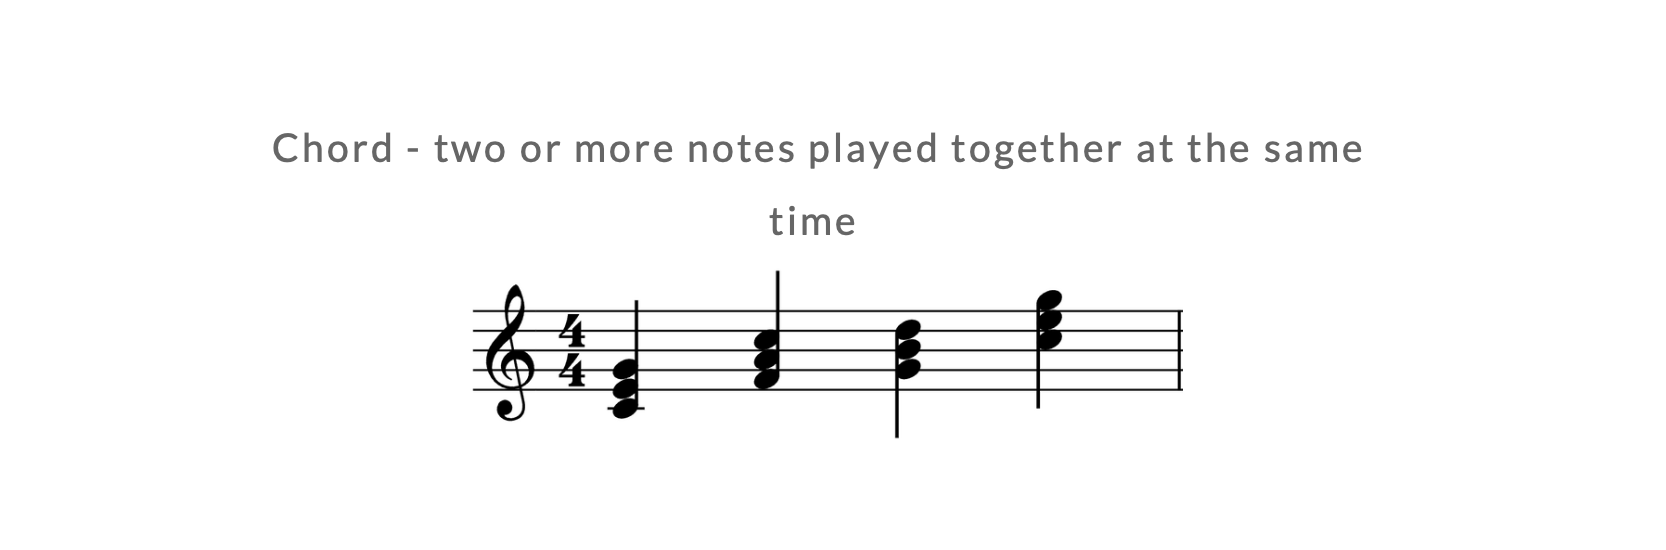 Chord Definition: two or more notes played together at the same time